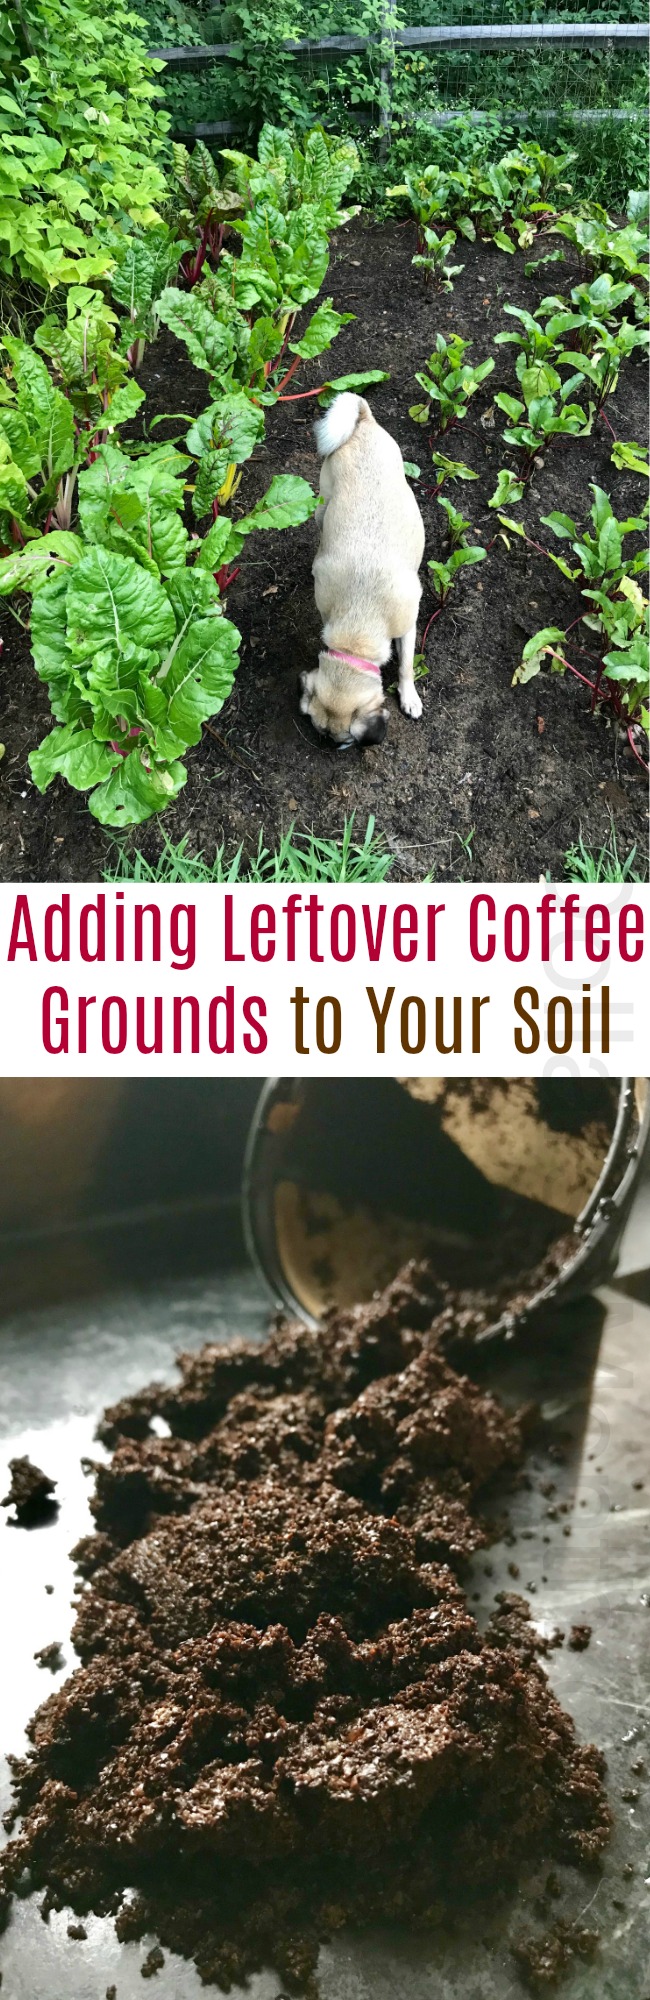 Garden Tip – Add Leftover Coffee Grounds to Your Soil